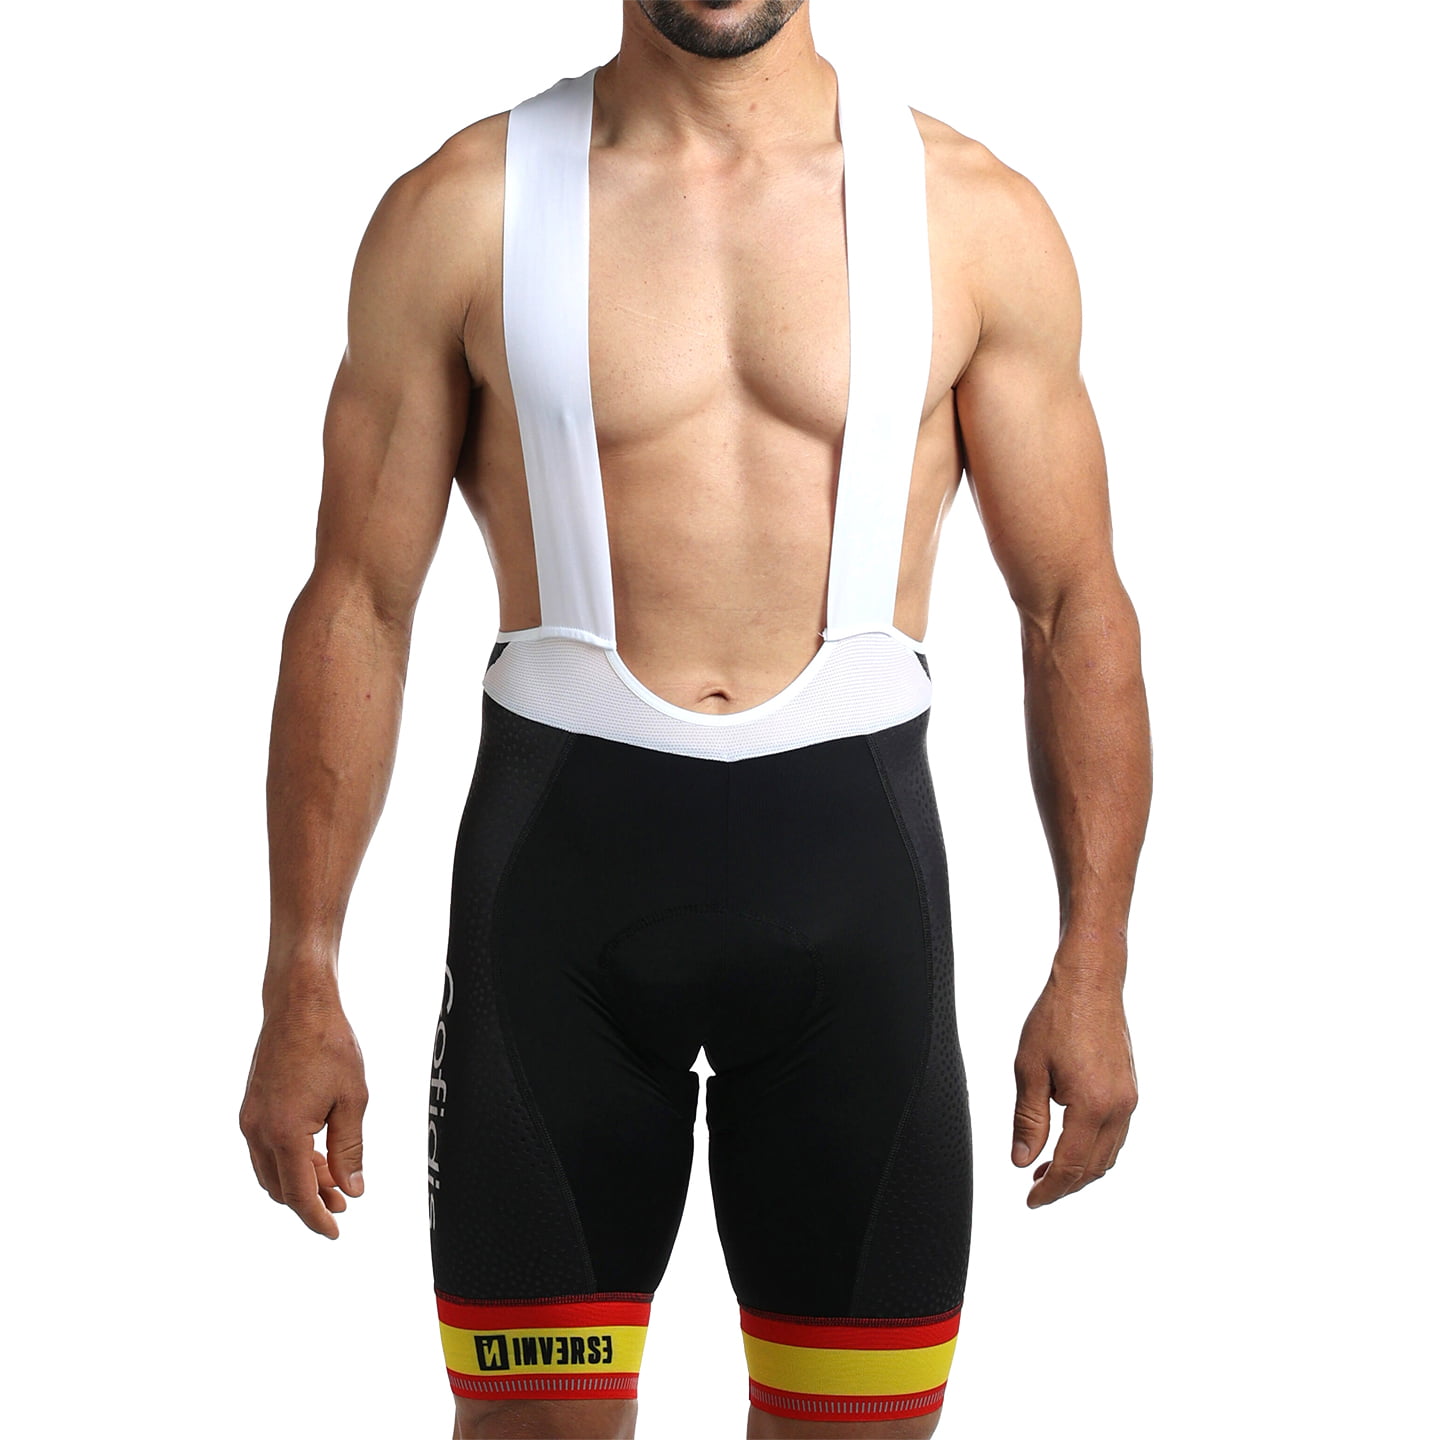 SPANISH NATIONAL TEAM 2024 Bib Shorts, for men, size 2XL, Cycle trousers, Cycle gear